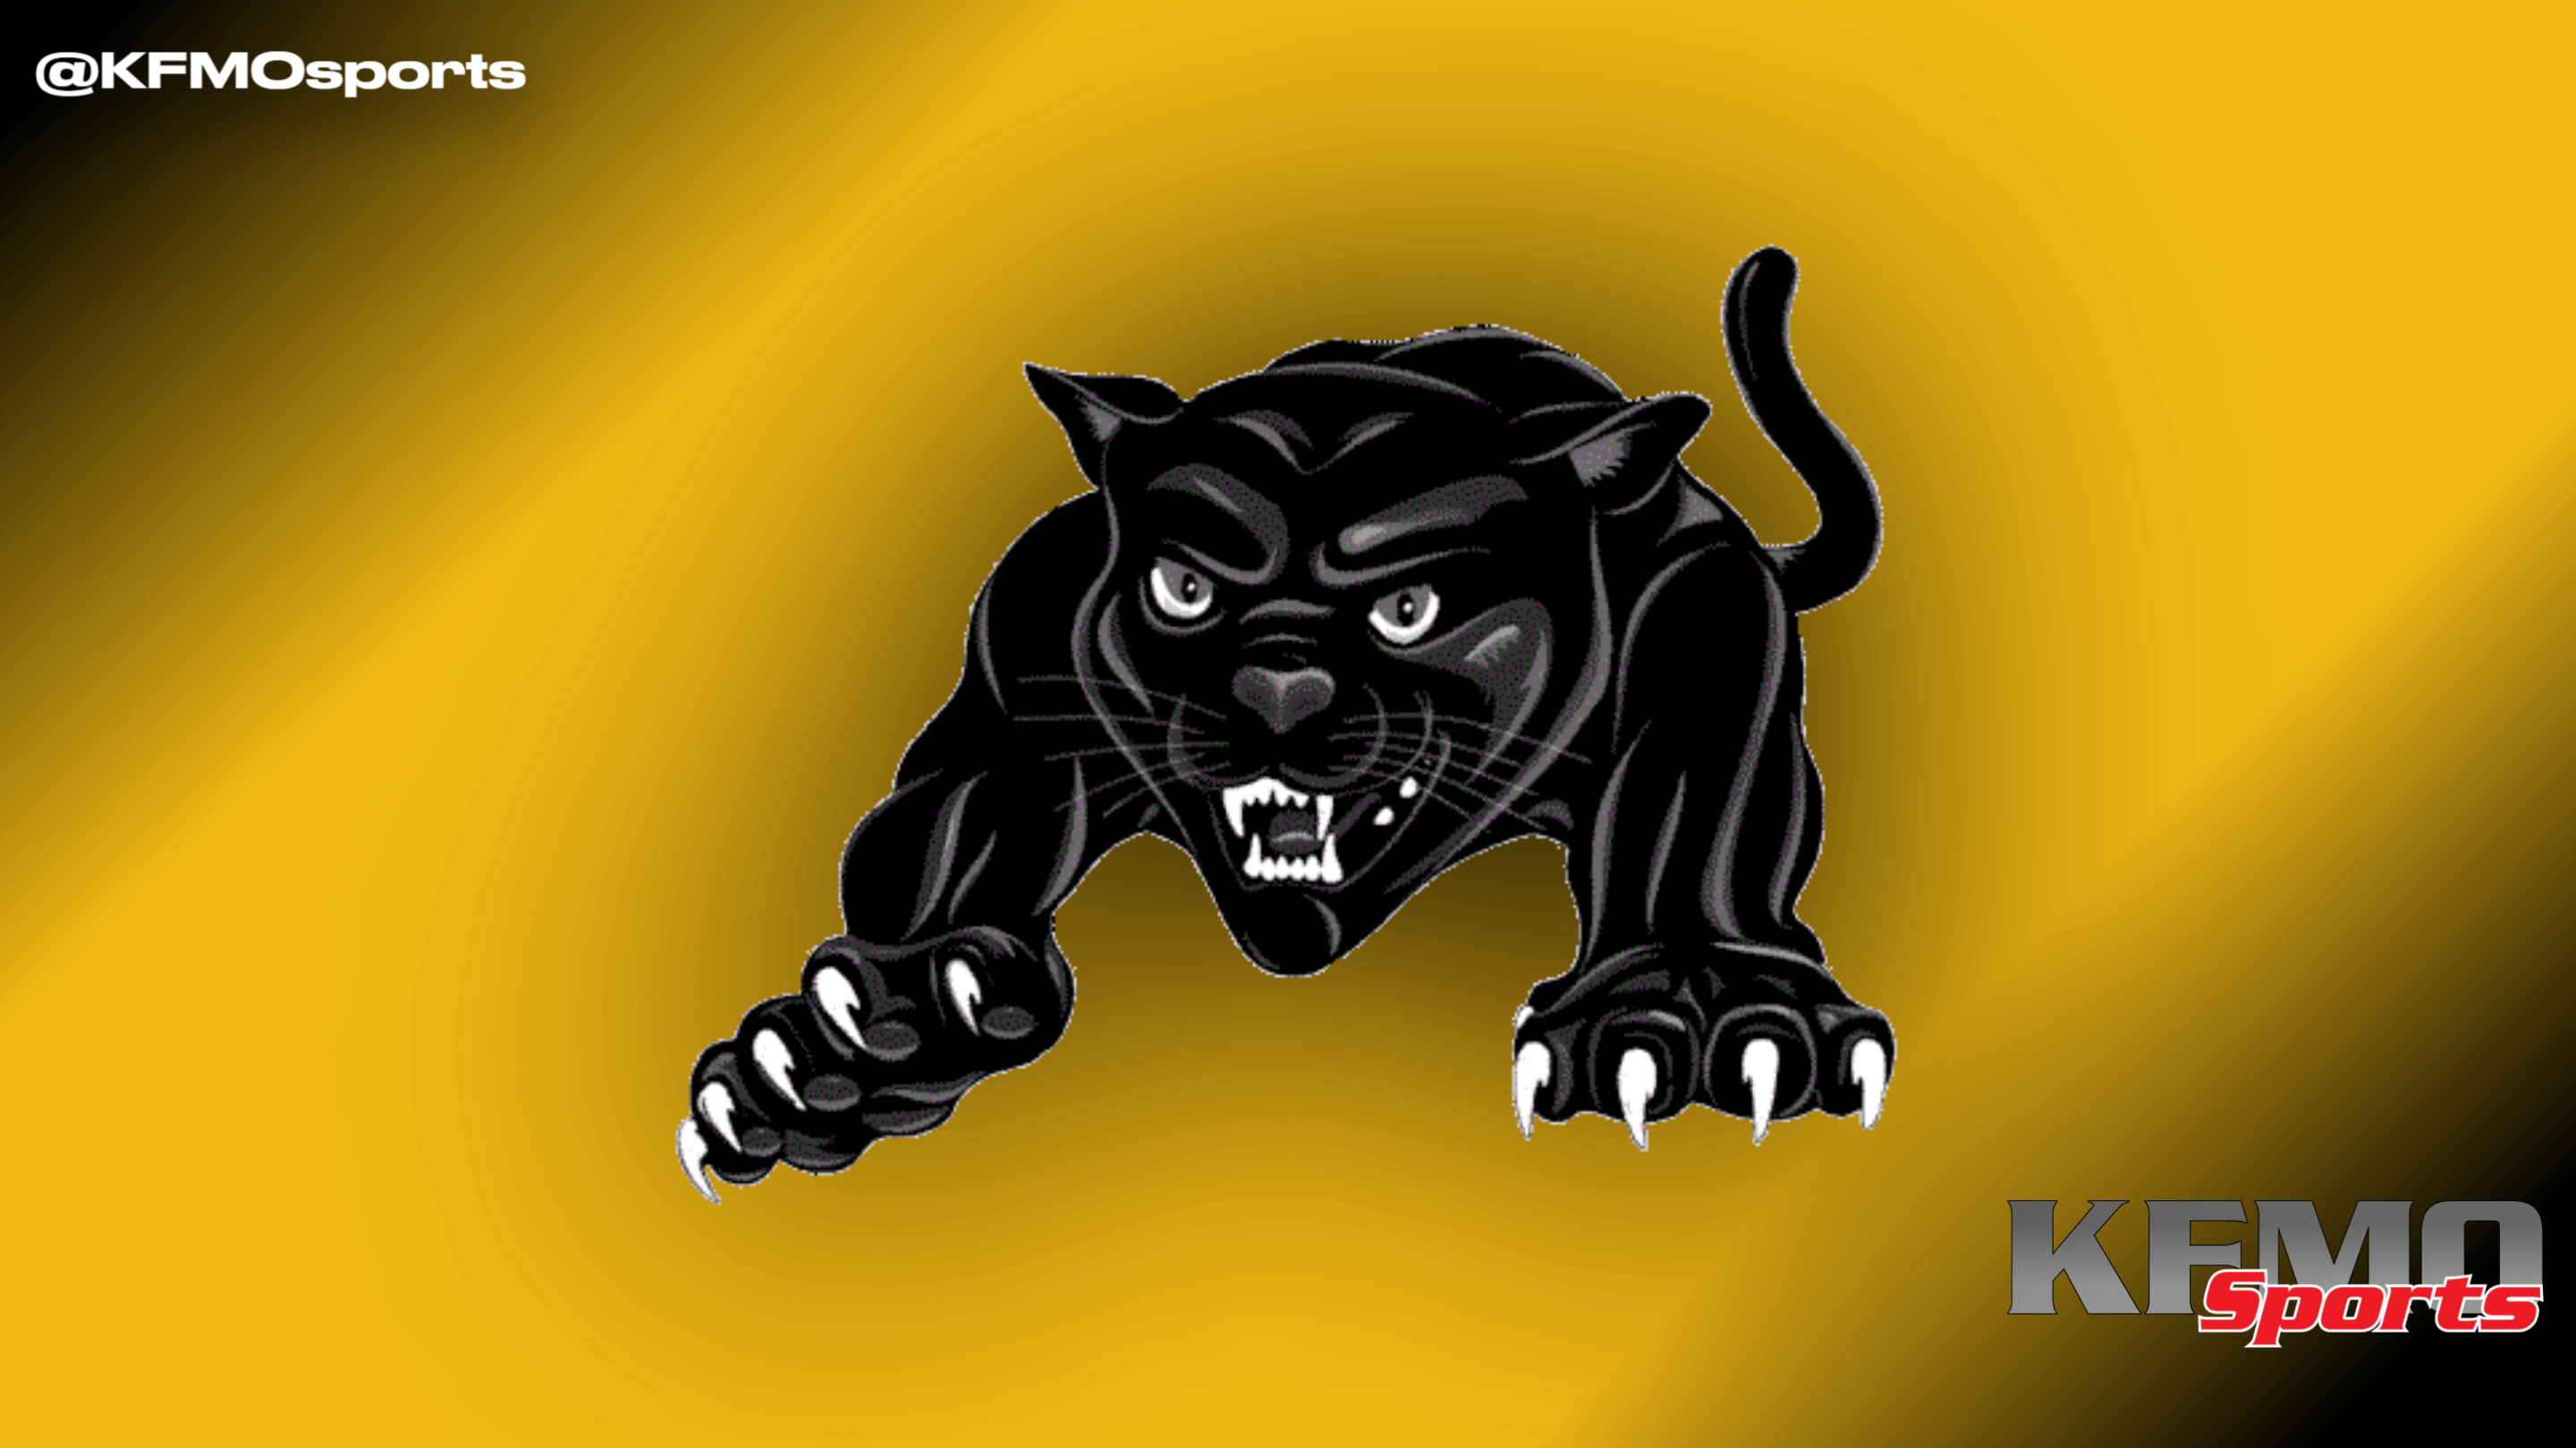 Fredericktown Blackcats FB Buying In to New Systems Under New Coaching Staff